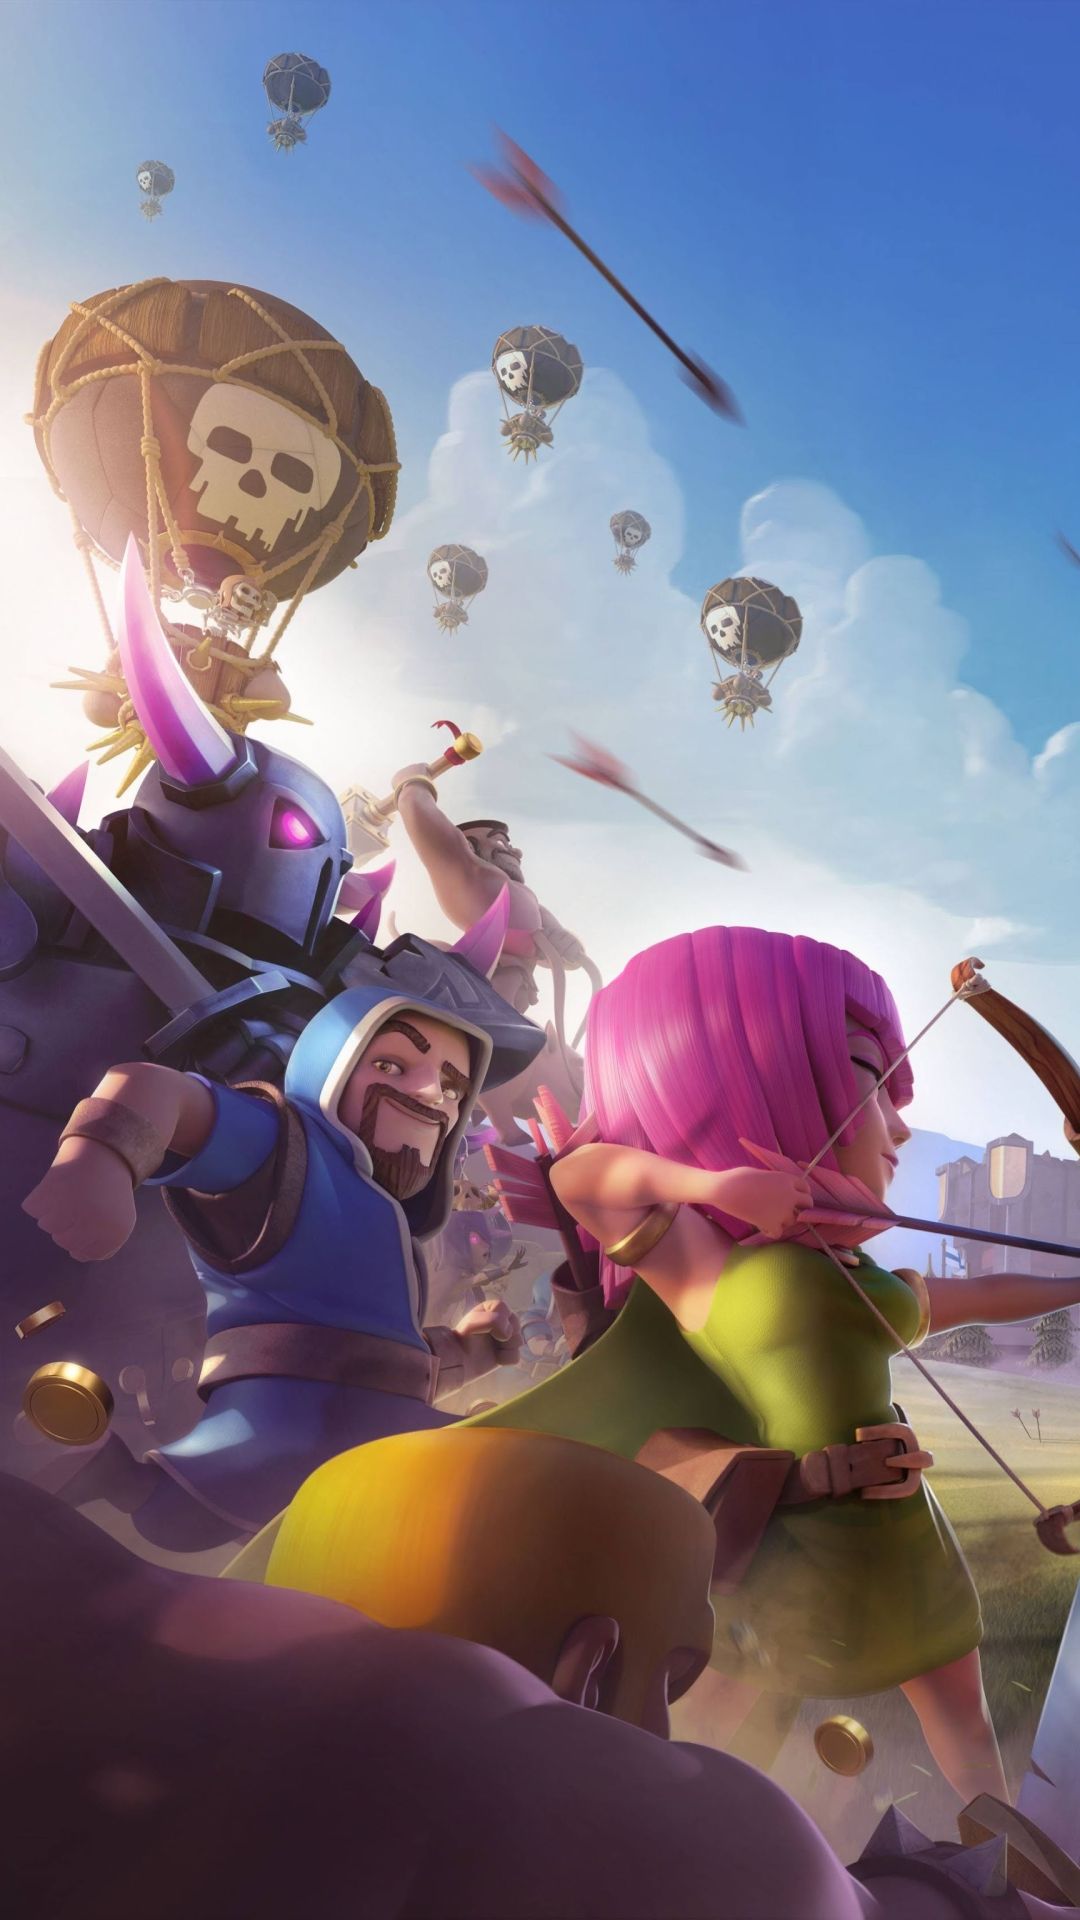 Clash Of Clans Loading Screen .wallpapertip.com